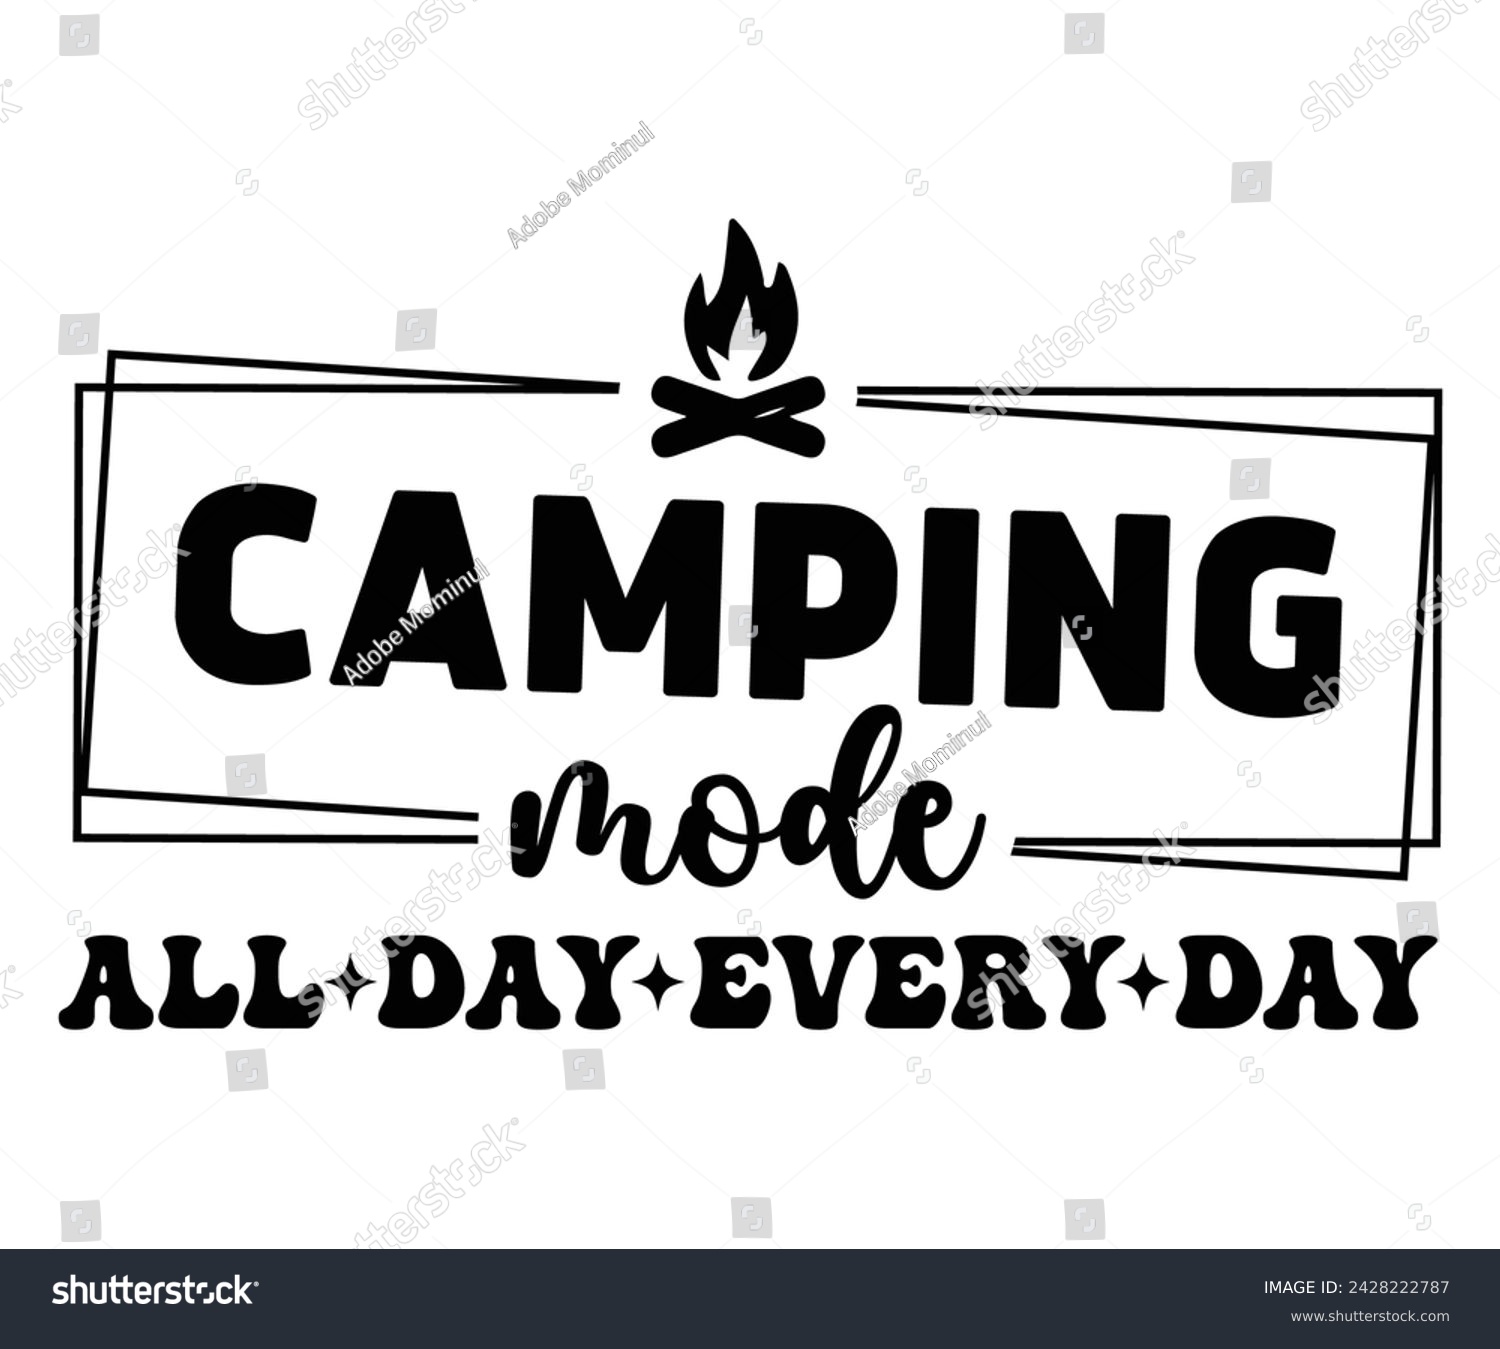 SVG of Camping mode All Day Every Day Svg,Happy Camper Svg,Camping Svg,Adventure Svg,Hiking Svg,Camp Saying,Camp Life Svg,Svg Cut Files, Png,Mountain T-shirt,Instant Download
 svg